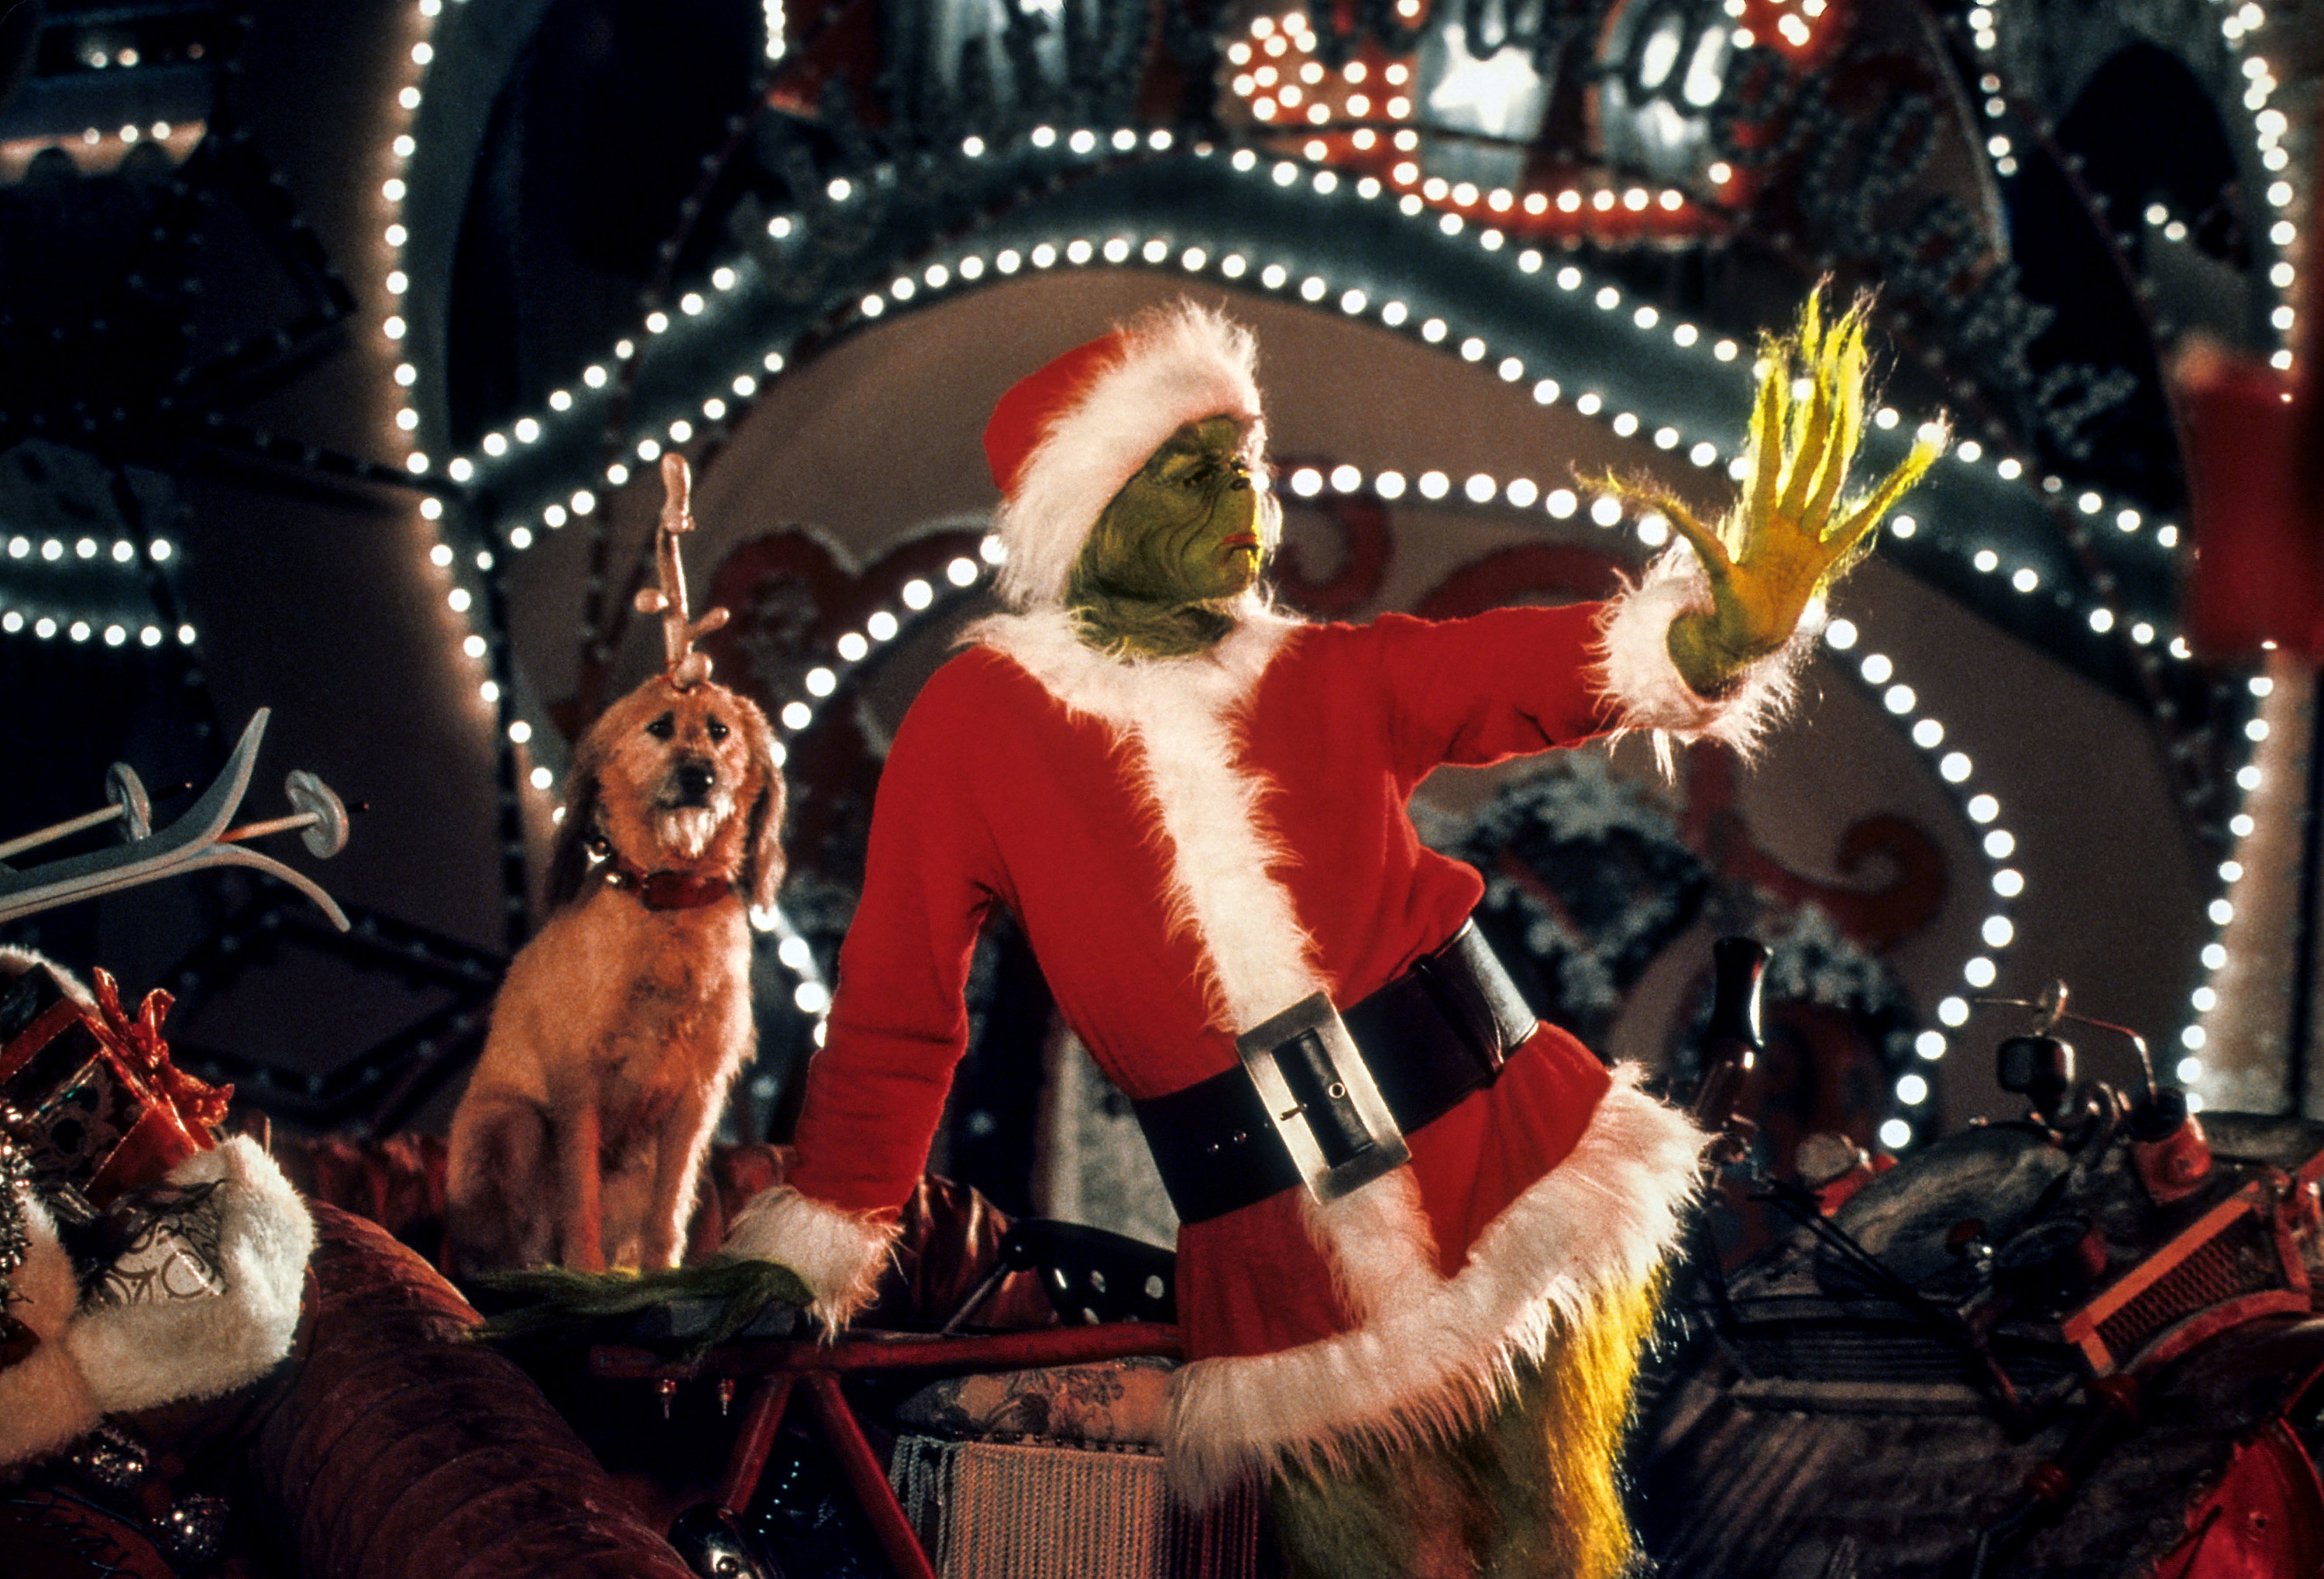 The Grinch and his pet dog